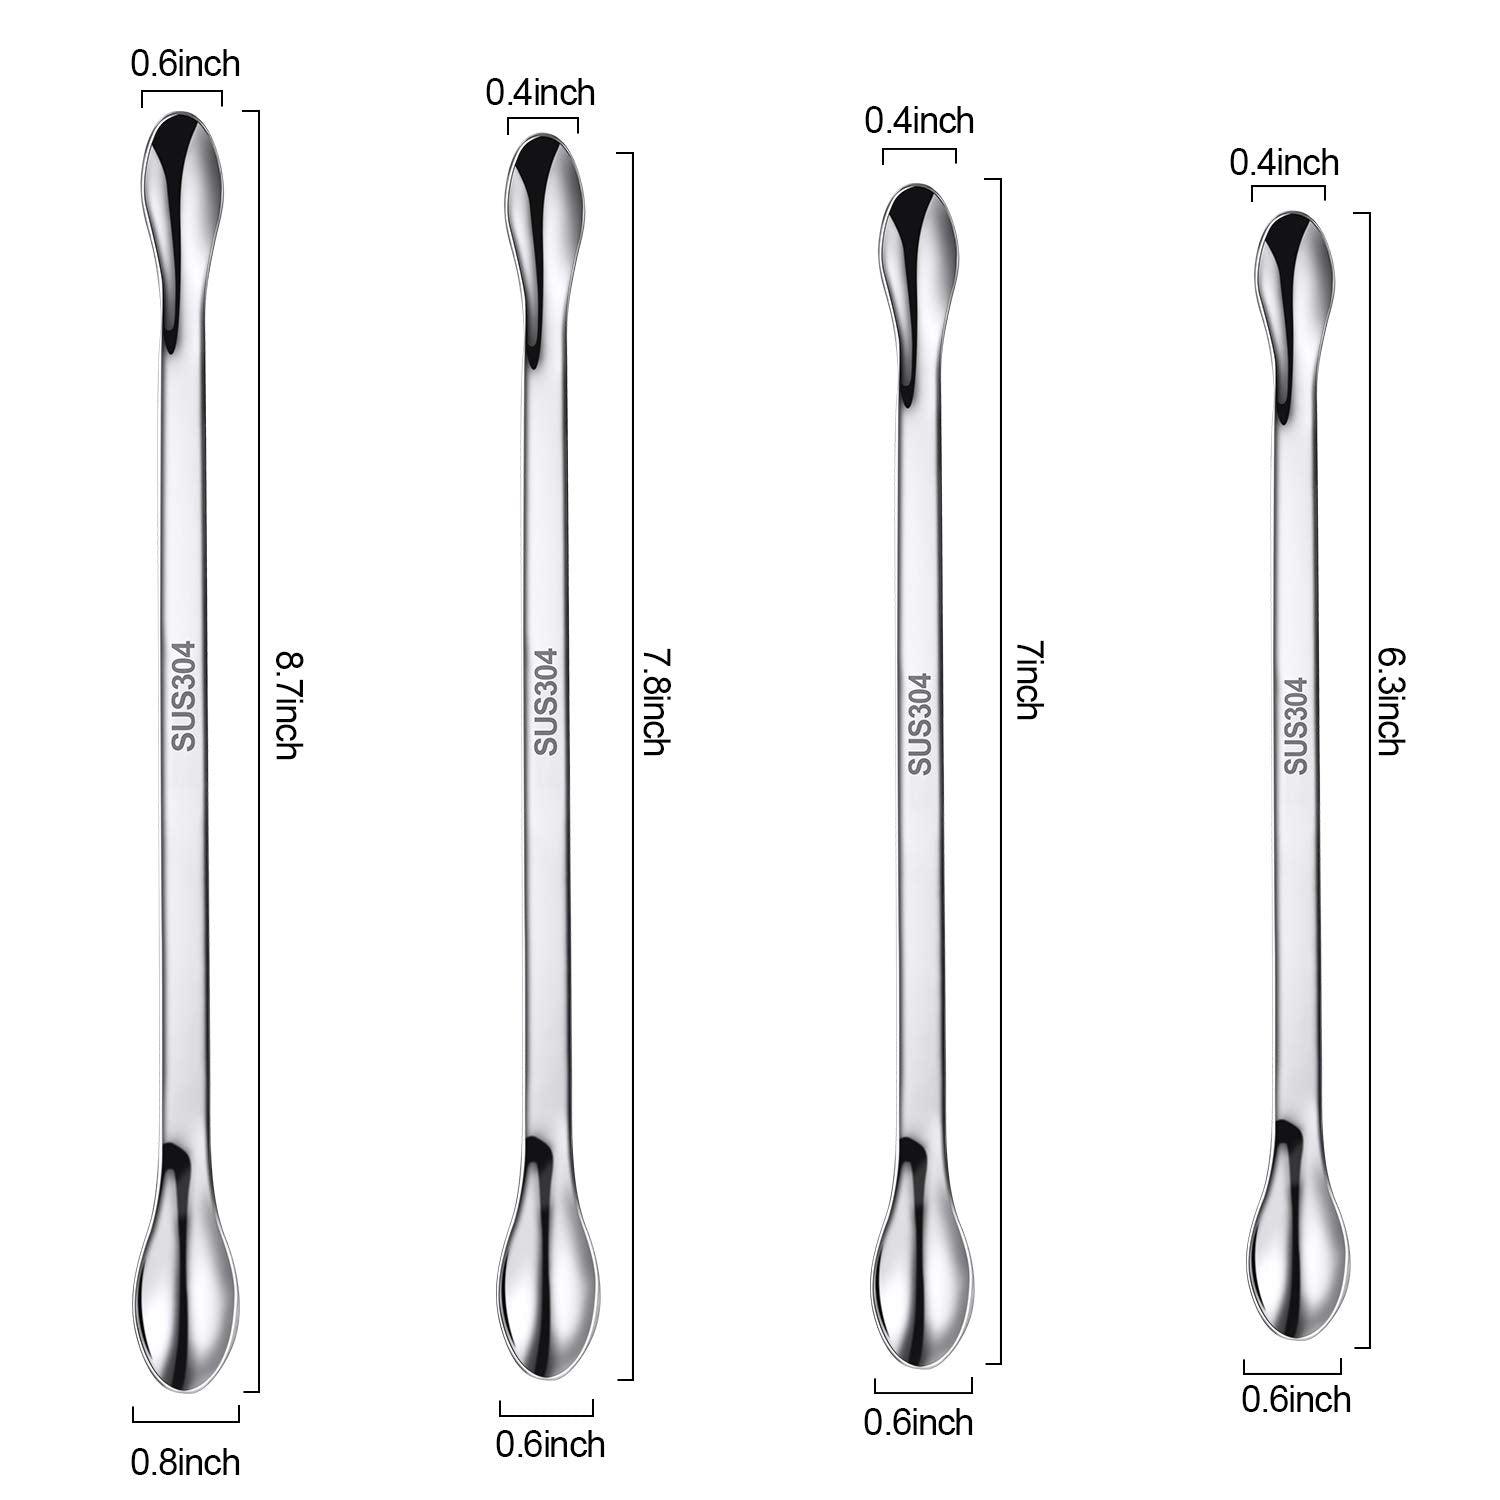 22 Pieces Stainless Steel Micro Spoon Set (supplement dispensing) - Anjelstore 